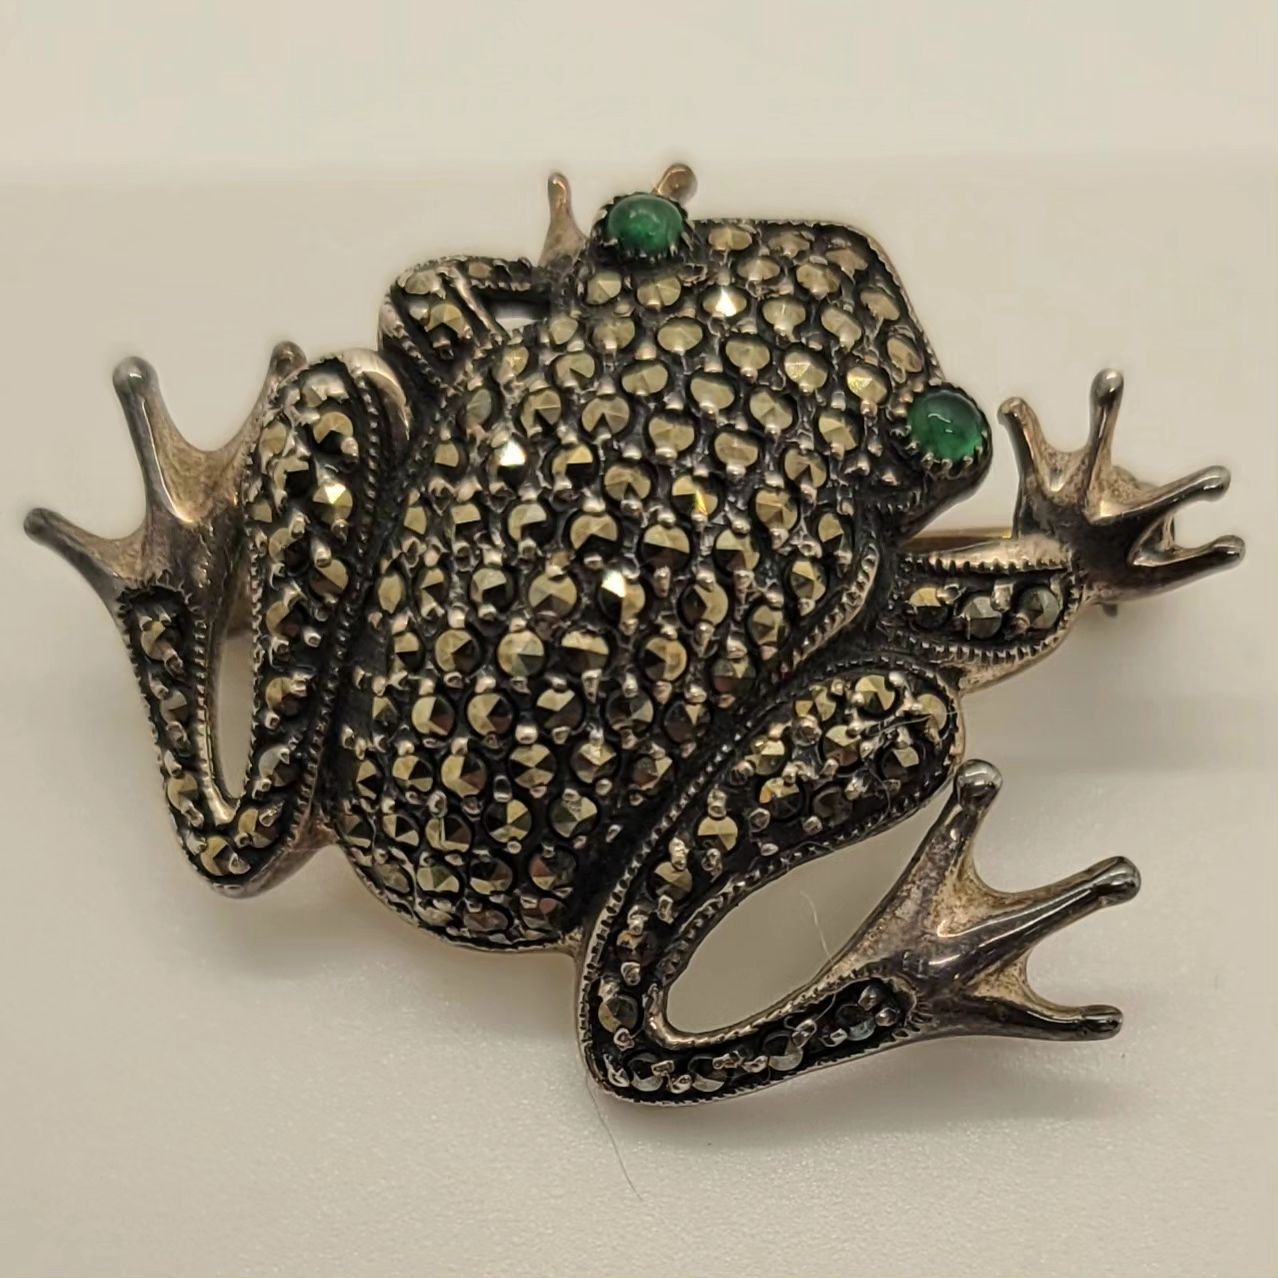 Vintage Sterling Silver Marcasite Frog Brooch with Natural Emerald Eyes